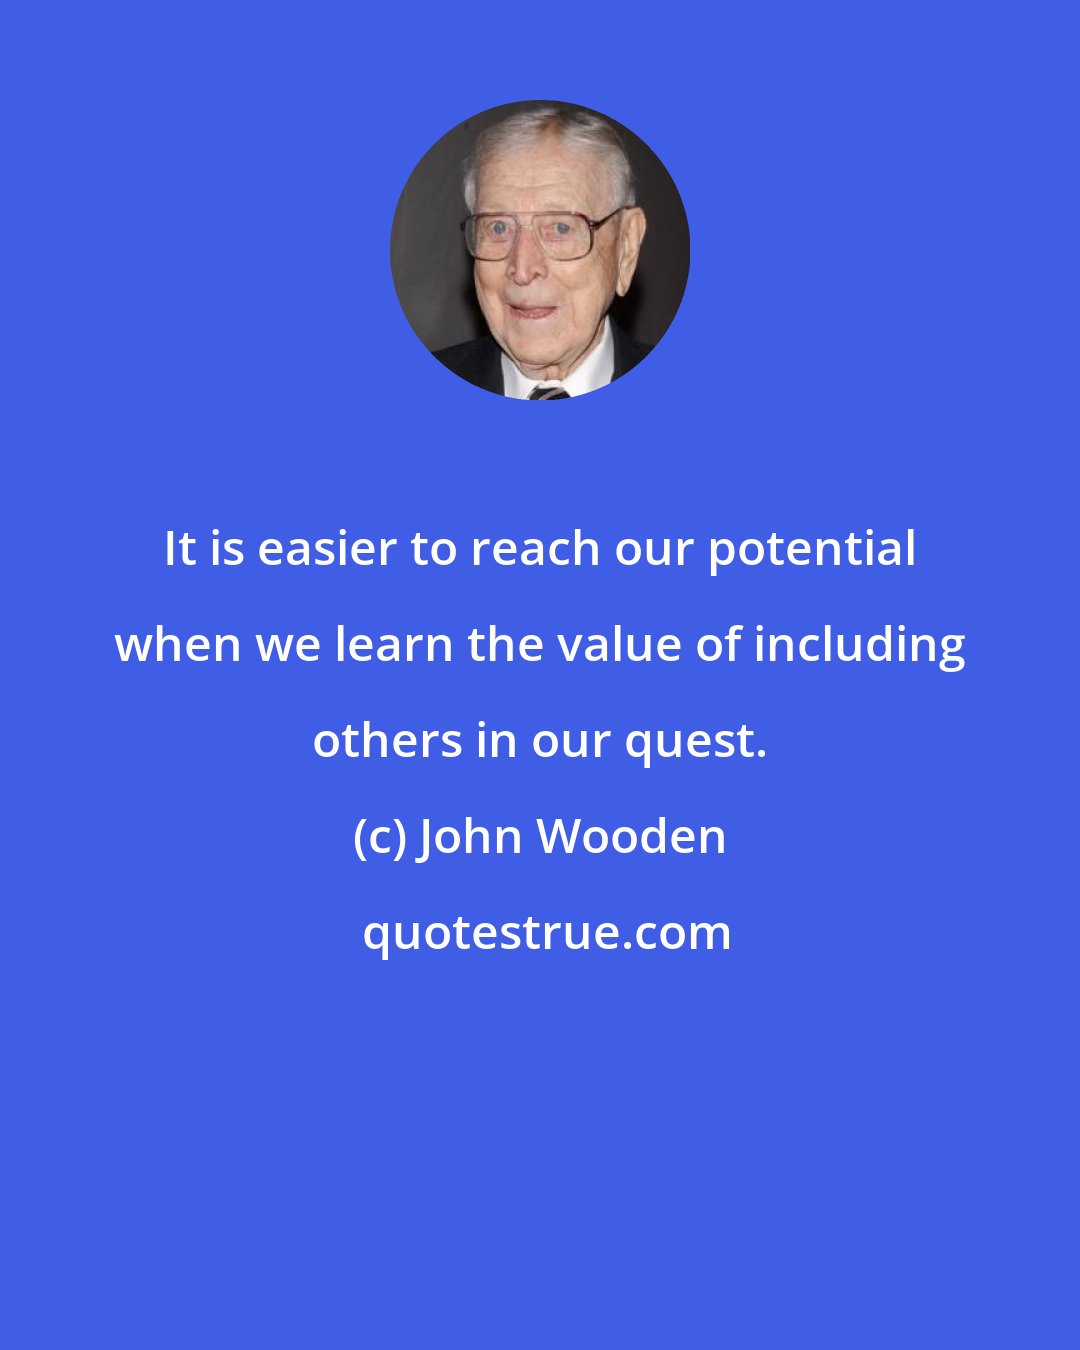 John Wooden: It is easier to reach our potential when we learn the value of including others in our quest.